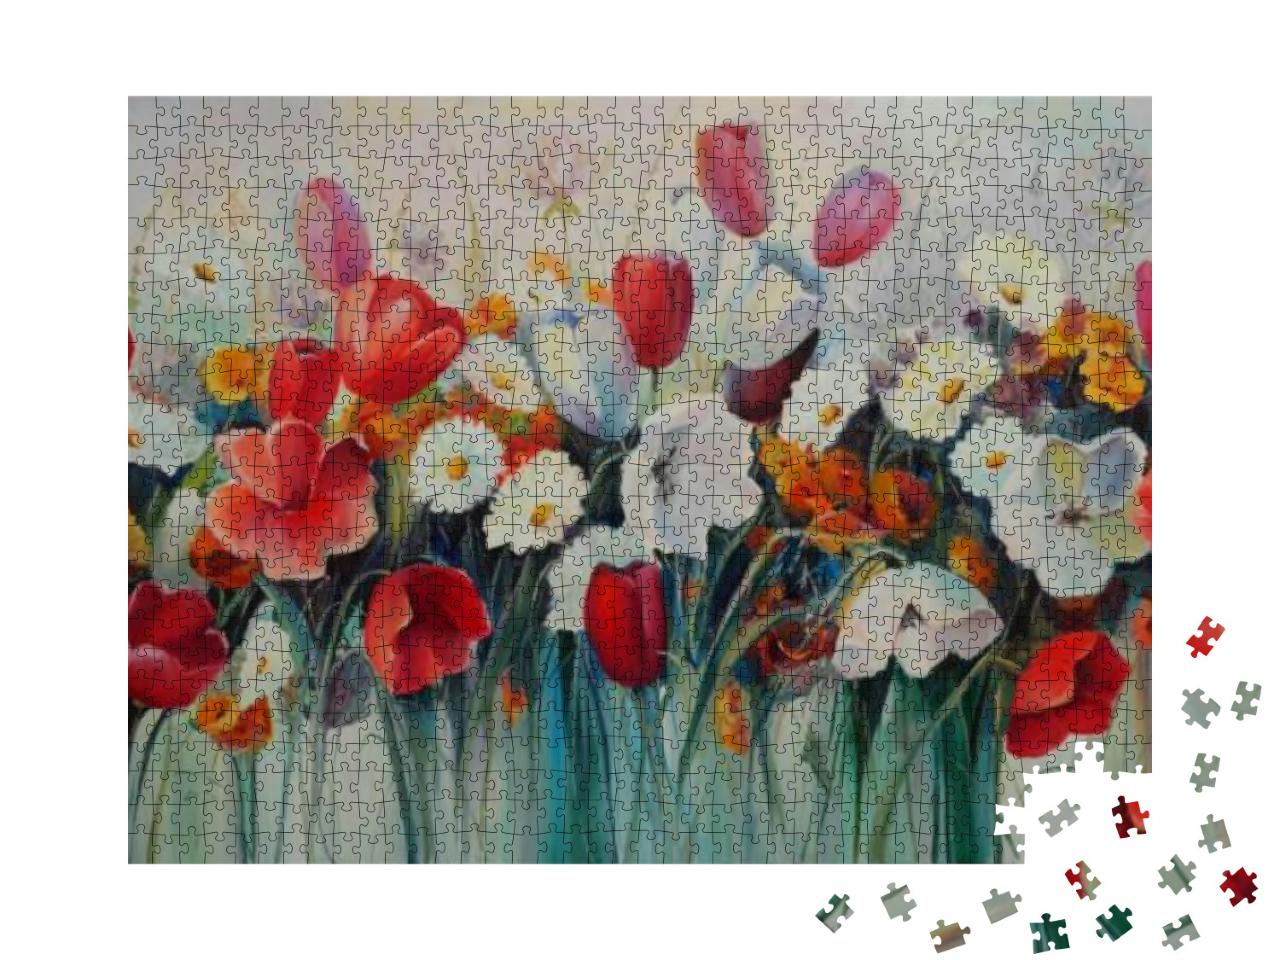 Painting Painted with Oil Paints on Canvas. Painting in t... Jigsaw Puzzle with 1000 pieces